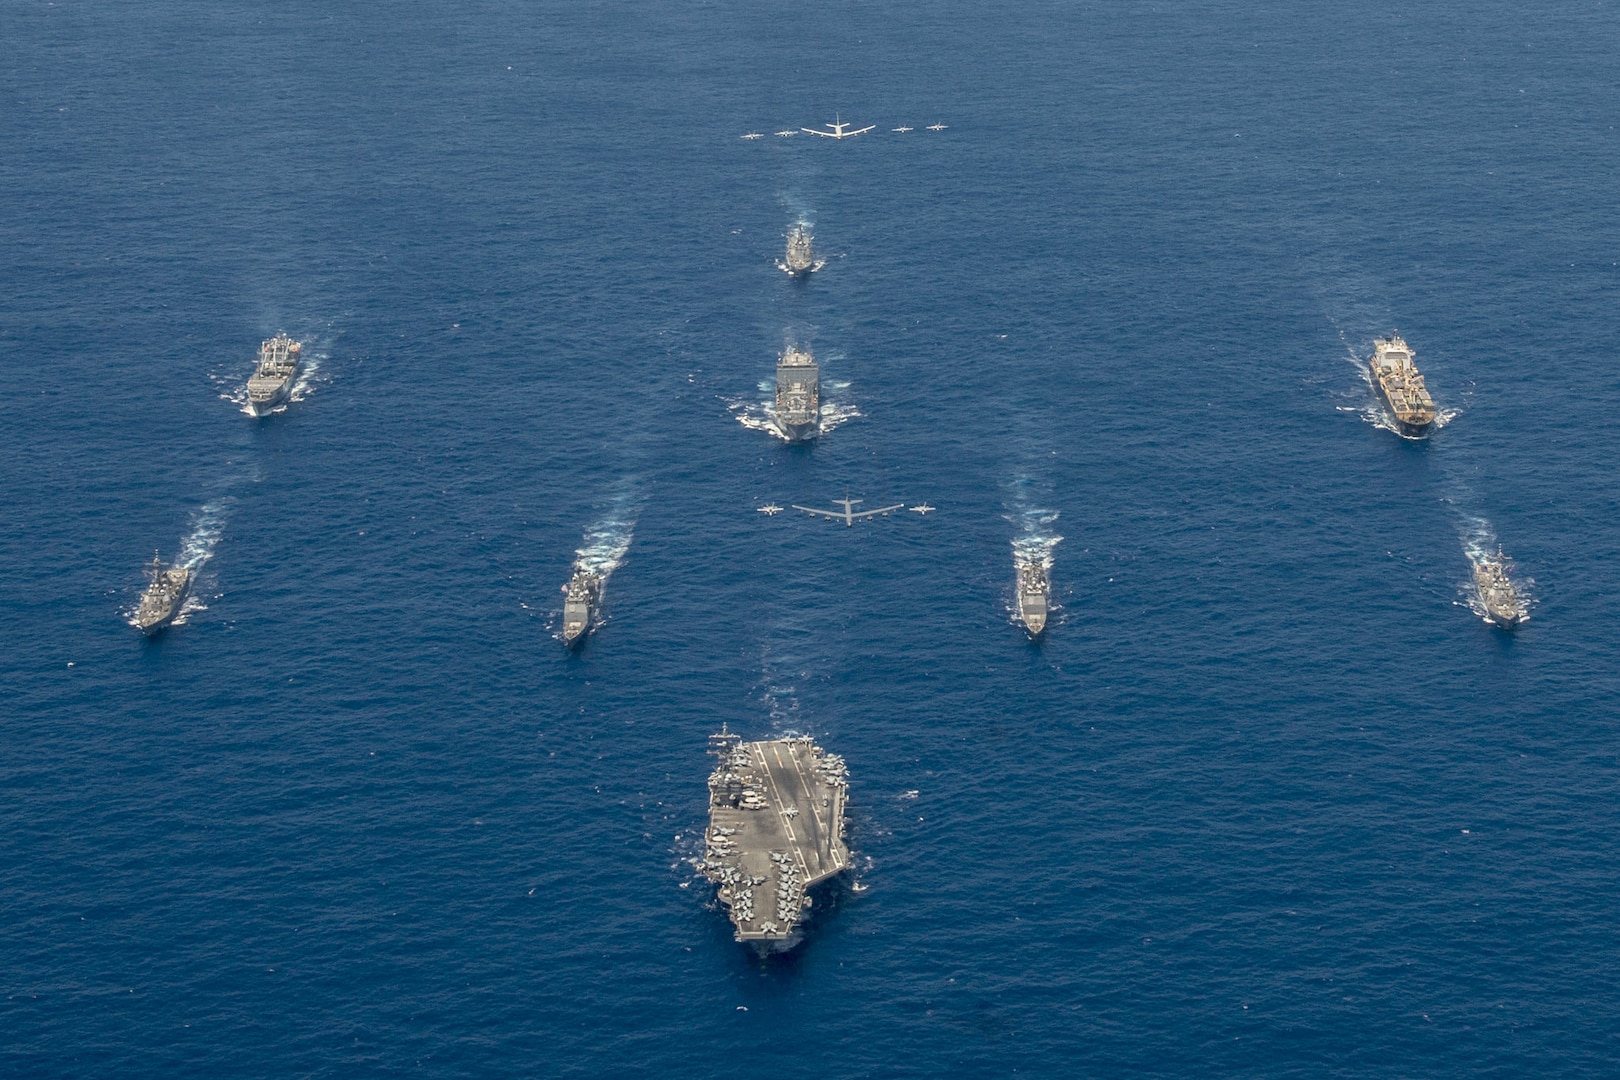 U.S. Indo-Pacific Command forces come together for Valiant Shield 2020